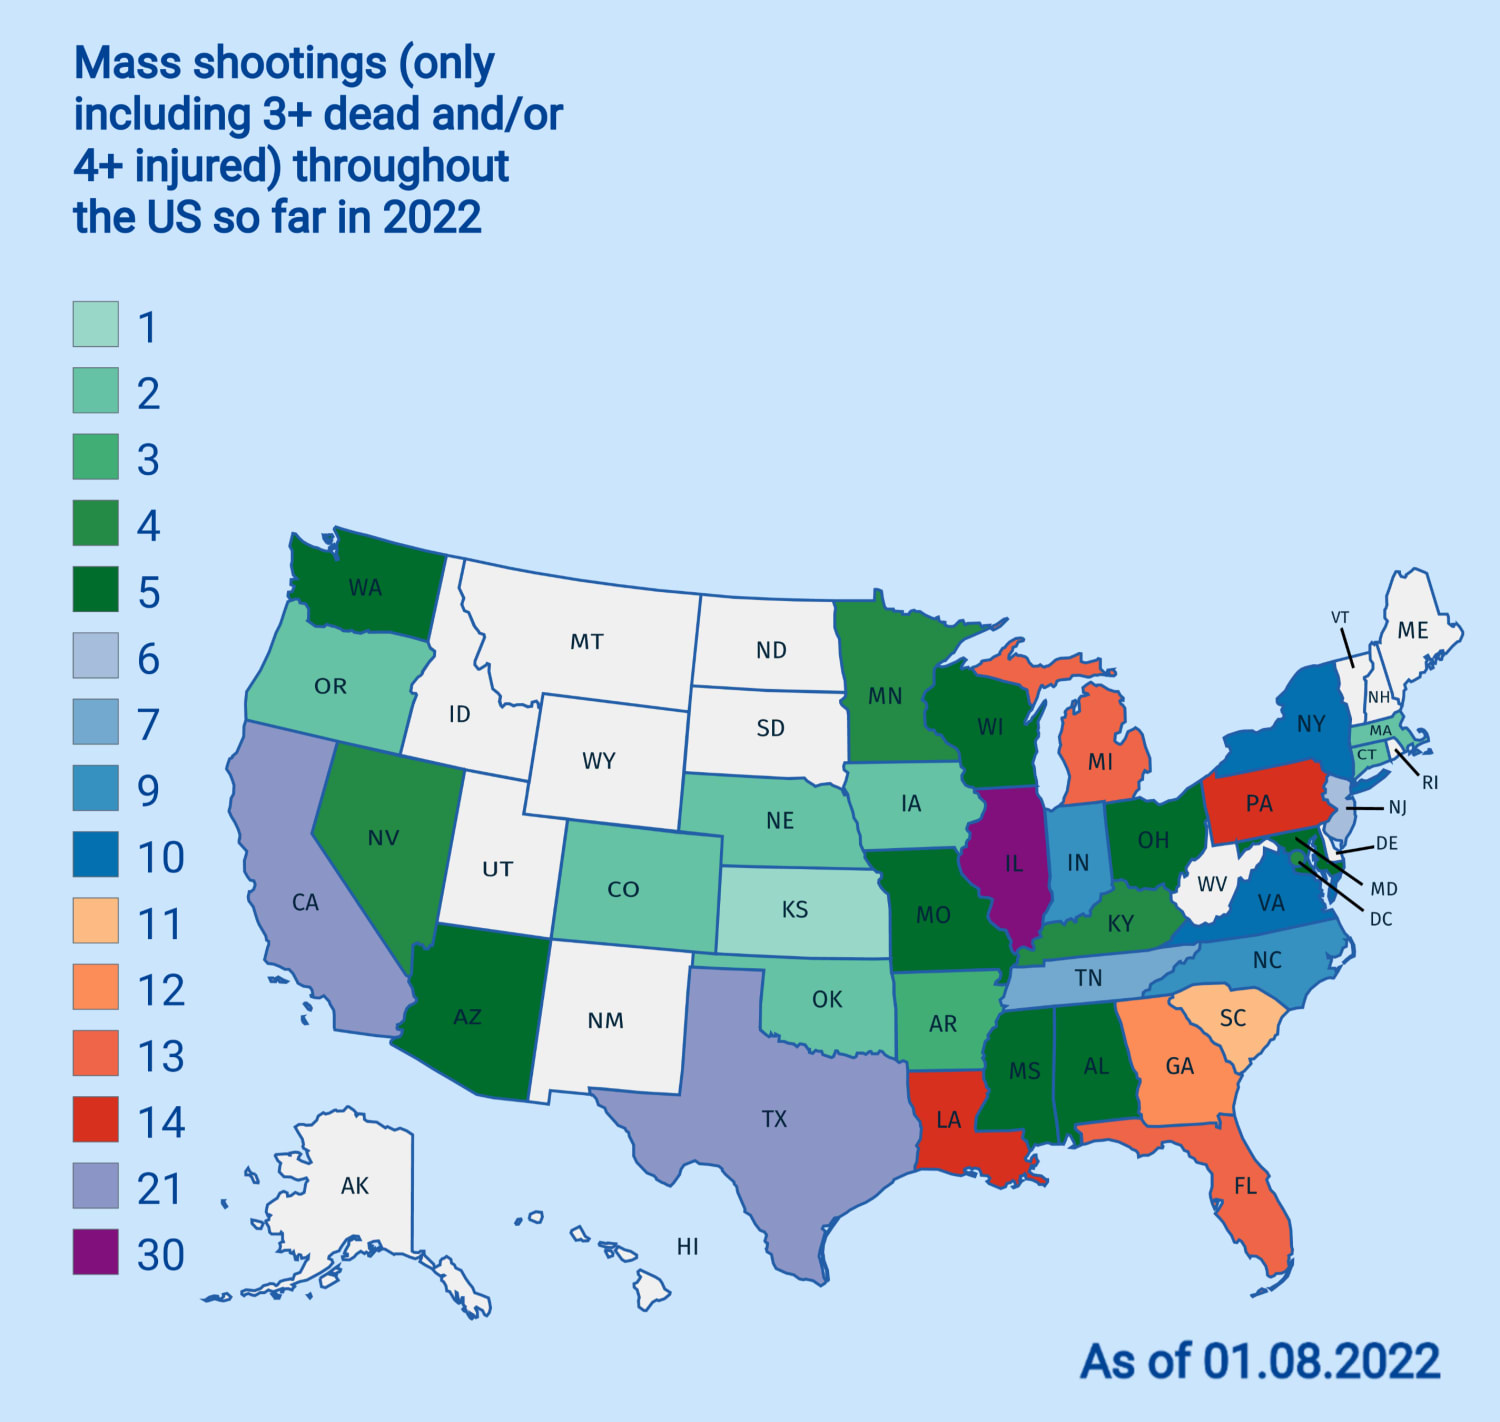 Mass shootings so far in 2022. Not taking population into account.